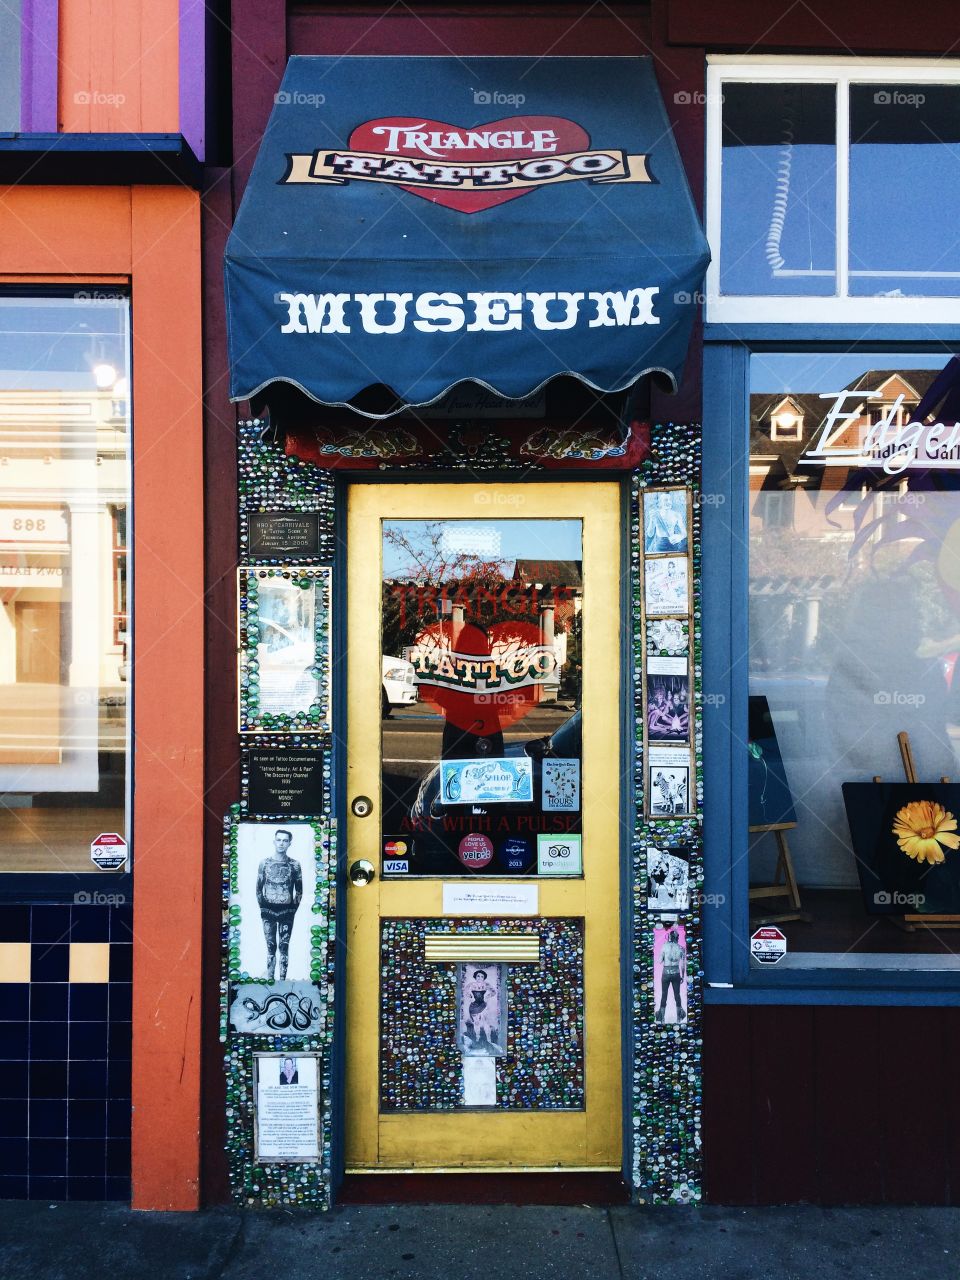 The museum of Tattoo in Fort Bragg, CA